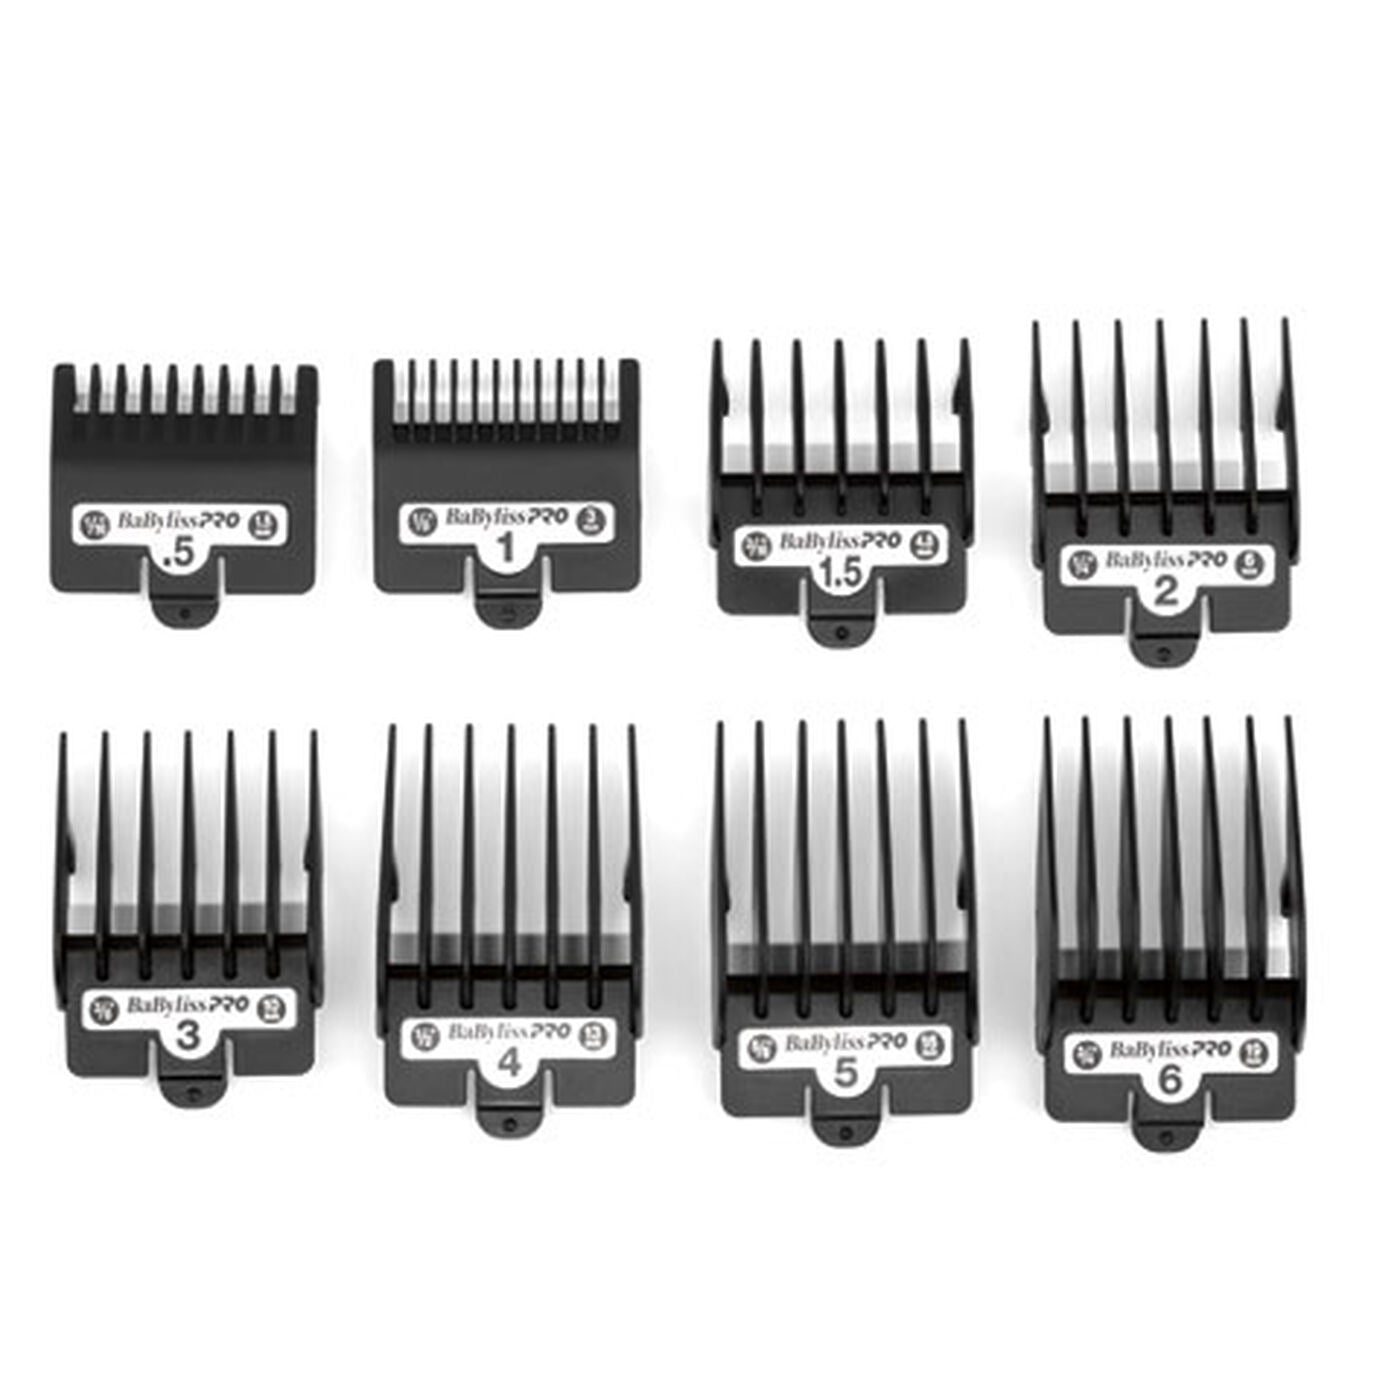 BaByliss Pro FX870 Clipper Series Replacement Blades [COLLECTION]